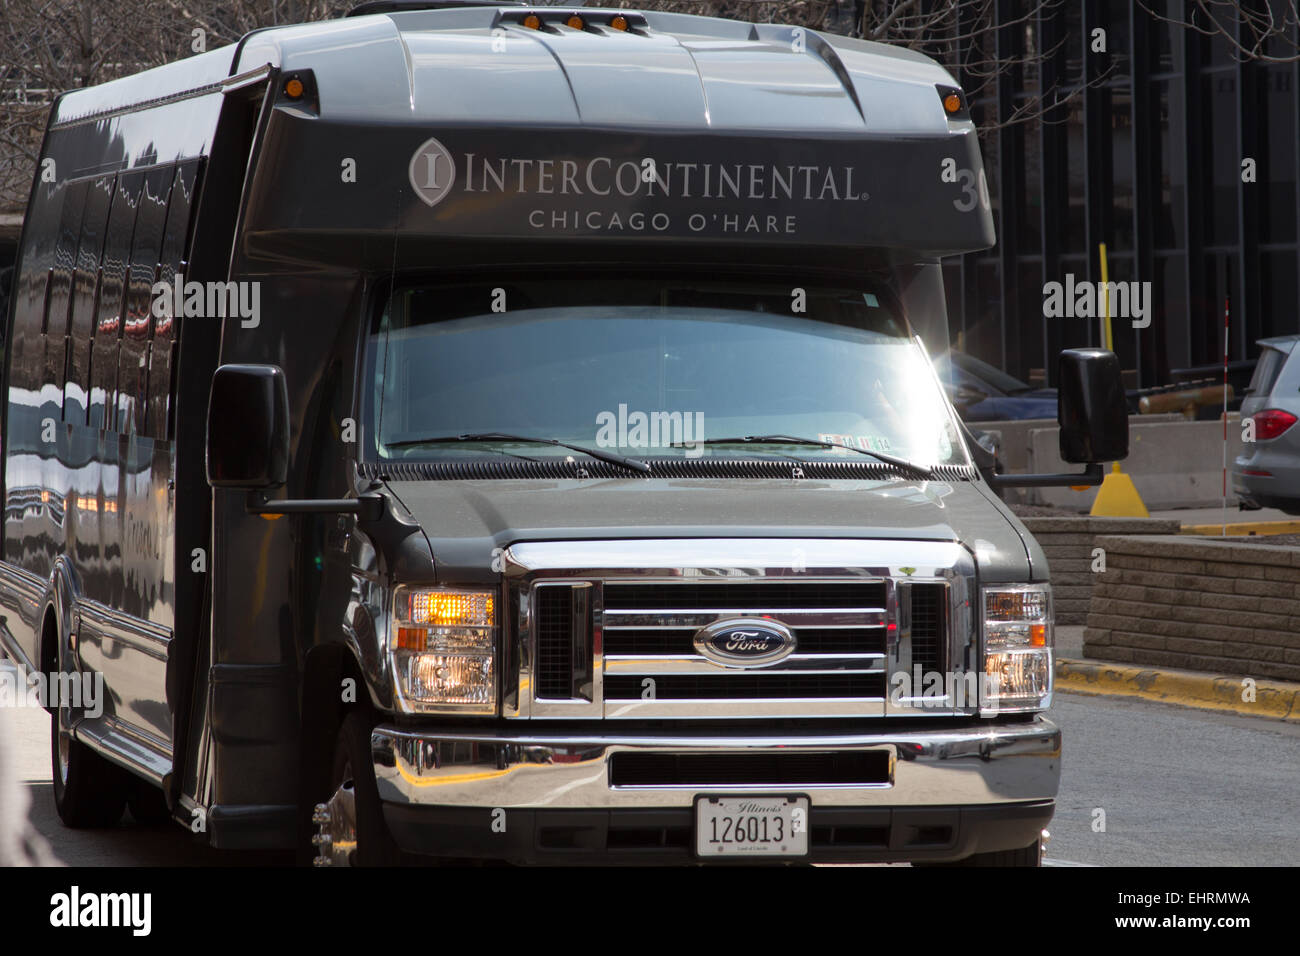 Intercontinental Chicago O'Hare hotel shuttle bus at Chicago O'Hare International airport, Rosemont, Illinois, USA Stock Photo